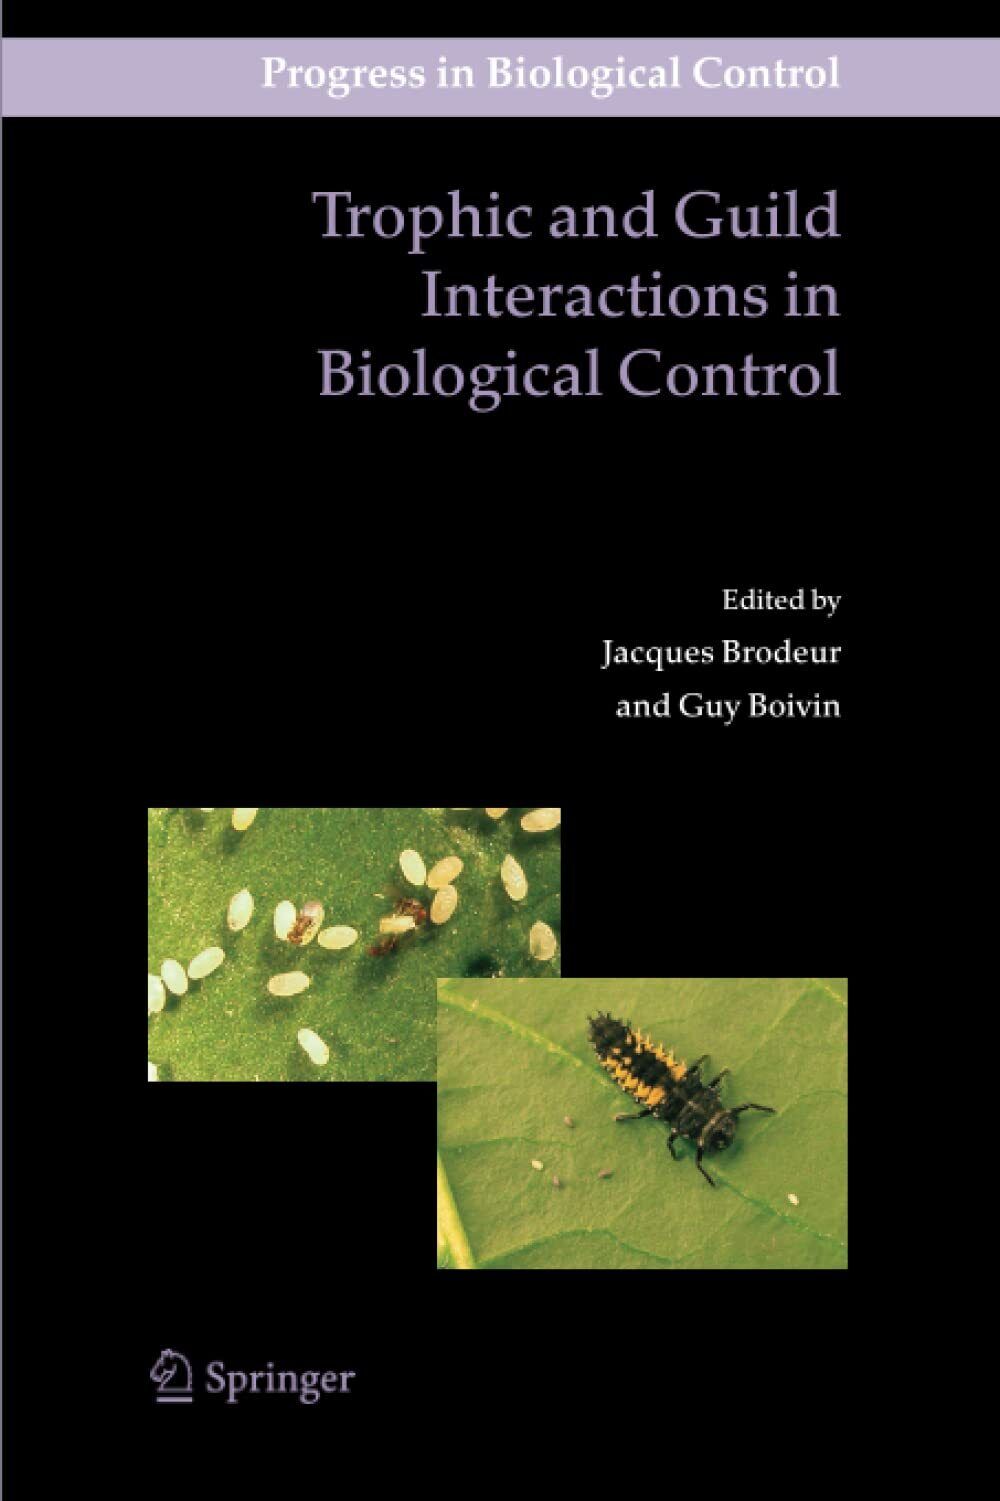 Trophic and Guild Interactions in Biological - Jacques Brodeur - Springer, 2010